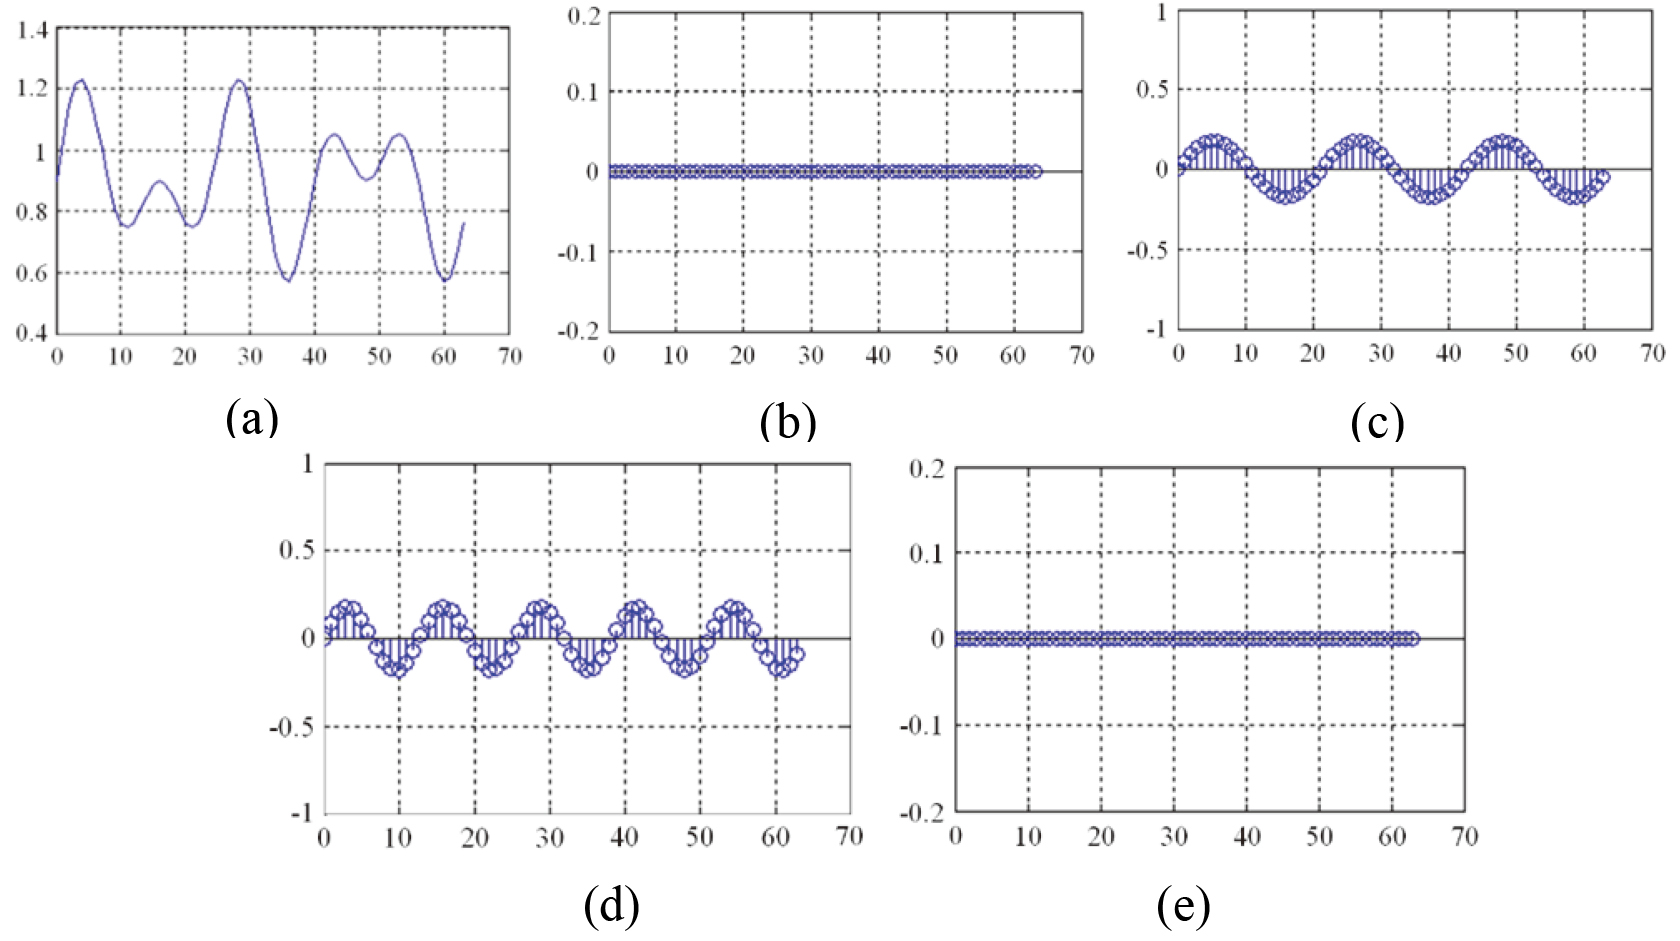 Simulation results of channel separation: (a) input signal, (b) separated signal on channel 1, (c) separated signal on channel 2, (d) separated signal on channel 3, and (e) separated signal on channel 4.